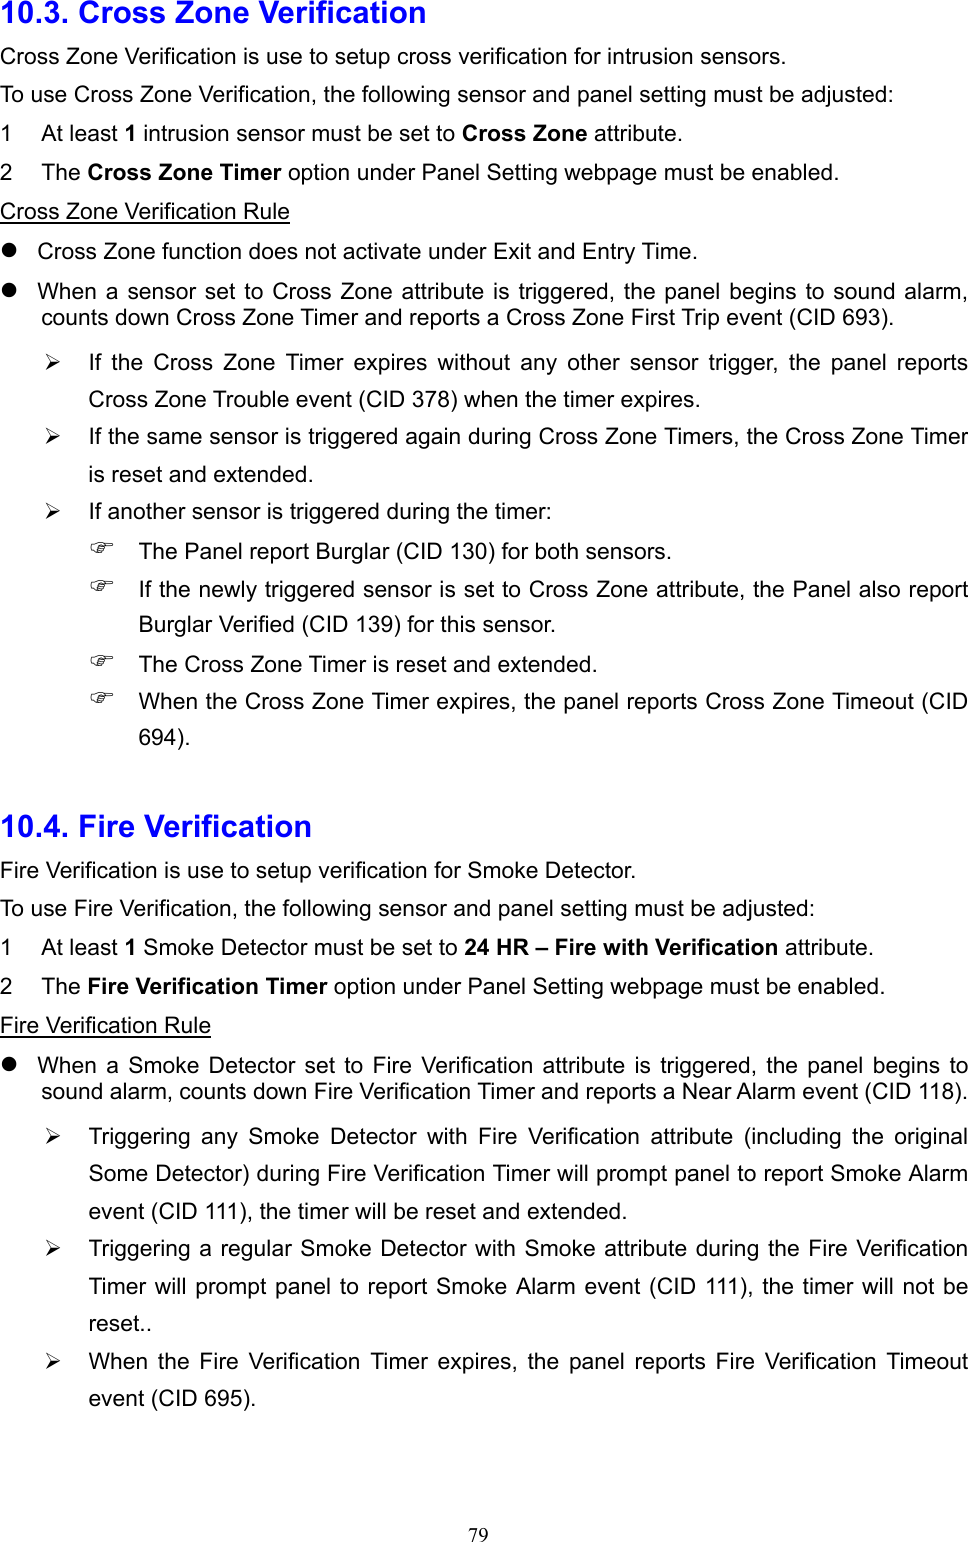  7910.3. Cross Zone Verification Cross Zone Verification is use to setup cross verification for intrusion sensors.   To use Cross Zone Verification, the following sensor and panel setting must be adjusted: 1  At least 1 intrusion sensor must be set to Cross Zone attribute. 2  The Cross Zone Timer option under Panel Setting webpage must be enabled. Cross Zone Verification Rule  Cross Zone function does not activate under Exit and Entry Time.  When a sensor set to  Cross Zone  attribute  is  triggered, the  panel  begins to sound alarm, counts down Cross Zone Timer and reports a Cross Zone First Trip event (CID 693).   If  the  Cross  Zone  Timer  expires  without  any  other  sensor  trigger,  the  panel  reports Cross Zone Trouble event (CID 378) when the timer expires.   If the same sensor is triggered again during Cross Zone Timers, the Cross Zone Timer is reset and extended.   If another sensor is triggered during the timer:  The Panel report Burglar (CID 130) for both sensors.  If the newly triggered sensor is set to Cross Zone attribute, the Panel also report Burglar Verified (CID 139) for this sensor.  The Cross Zone Timer is reset and extended.  When the Cross Zone Timer expires, the panel reports Cross Zone Timeout (CID 694).  10.4. Fire Verification   Fire Verification is use to setup verification for Smoke Detector.   To use Fire Verification, the following sensor and panel setting must be adjusted: 1  At least 1 Smoke Detector must be set to 24 HR – Fire with Verification attribute. 2  The Fire Verification Timer option under Panel Setting webpage must be enabled. Fire Verification Rule  When  a  Smoke  Detector  set  to  Fire  Verification attribute  is  triggered,  the  panel  begins  to sound alarm, counts down Fire Verification Timer and reports a Near Alarm event (CID 118).   Triggering  any  Smoke  Detector  with  Fire  Verification  attribute  (including  the  original Some Detector) during Fire Verification Timer will prompt panel to report Smoke Alarm event (CID 111), the timer will be reset and extended.   Triggering a regular Smoke Detector with Smoke attribute during the Fire Verification Timer will prompt panel to report Smoke Alarm event (CID 111), the  timer will not be reset..   When  the  Fire  Verification  Timer  expires,  the  panel  reports  Fire  Verification  Timeout event (CID 695).   